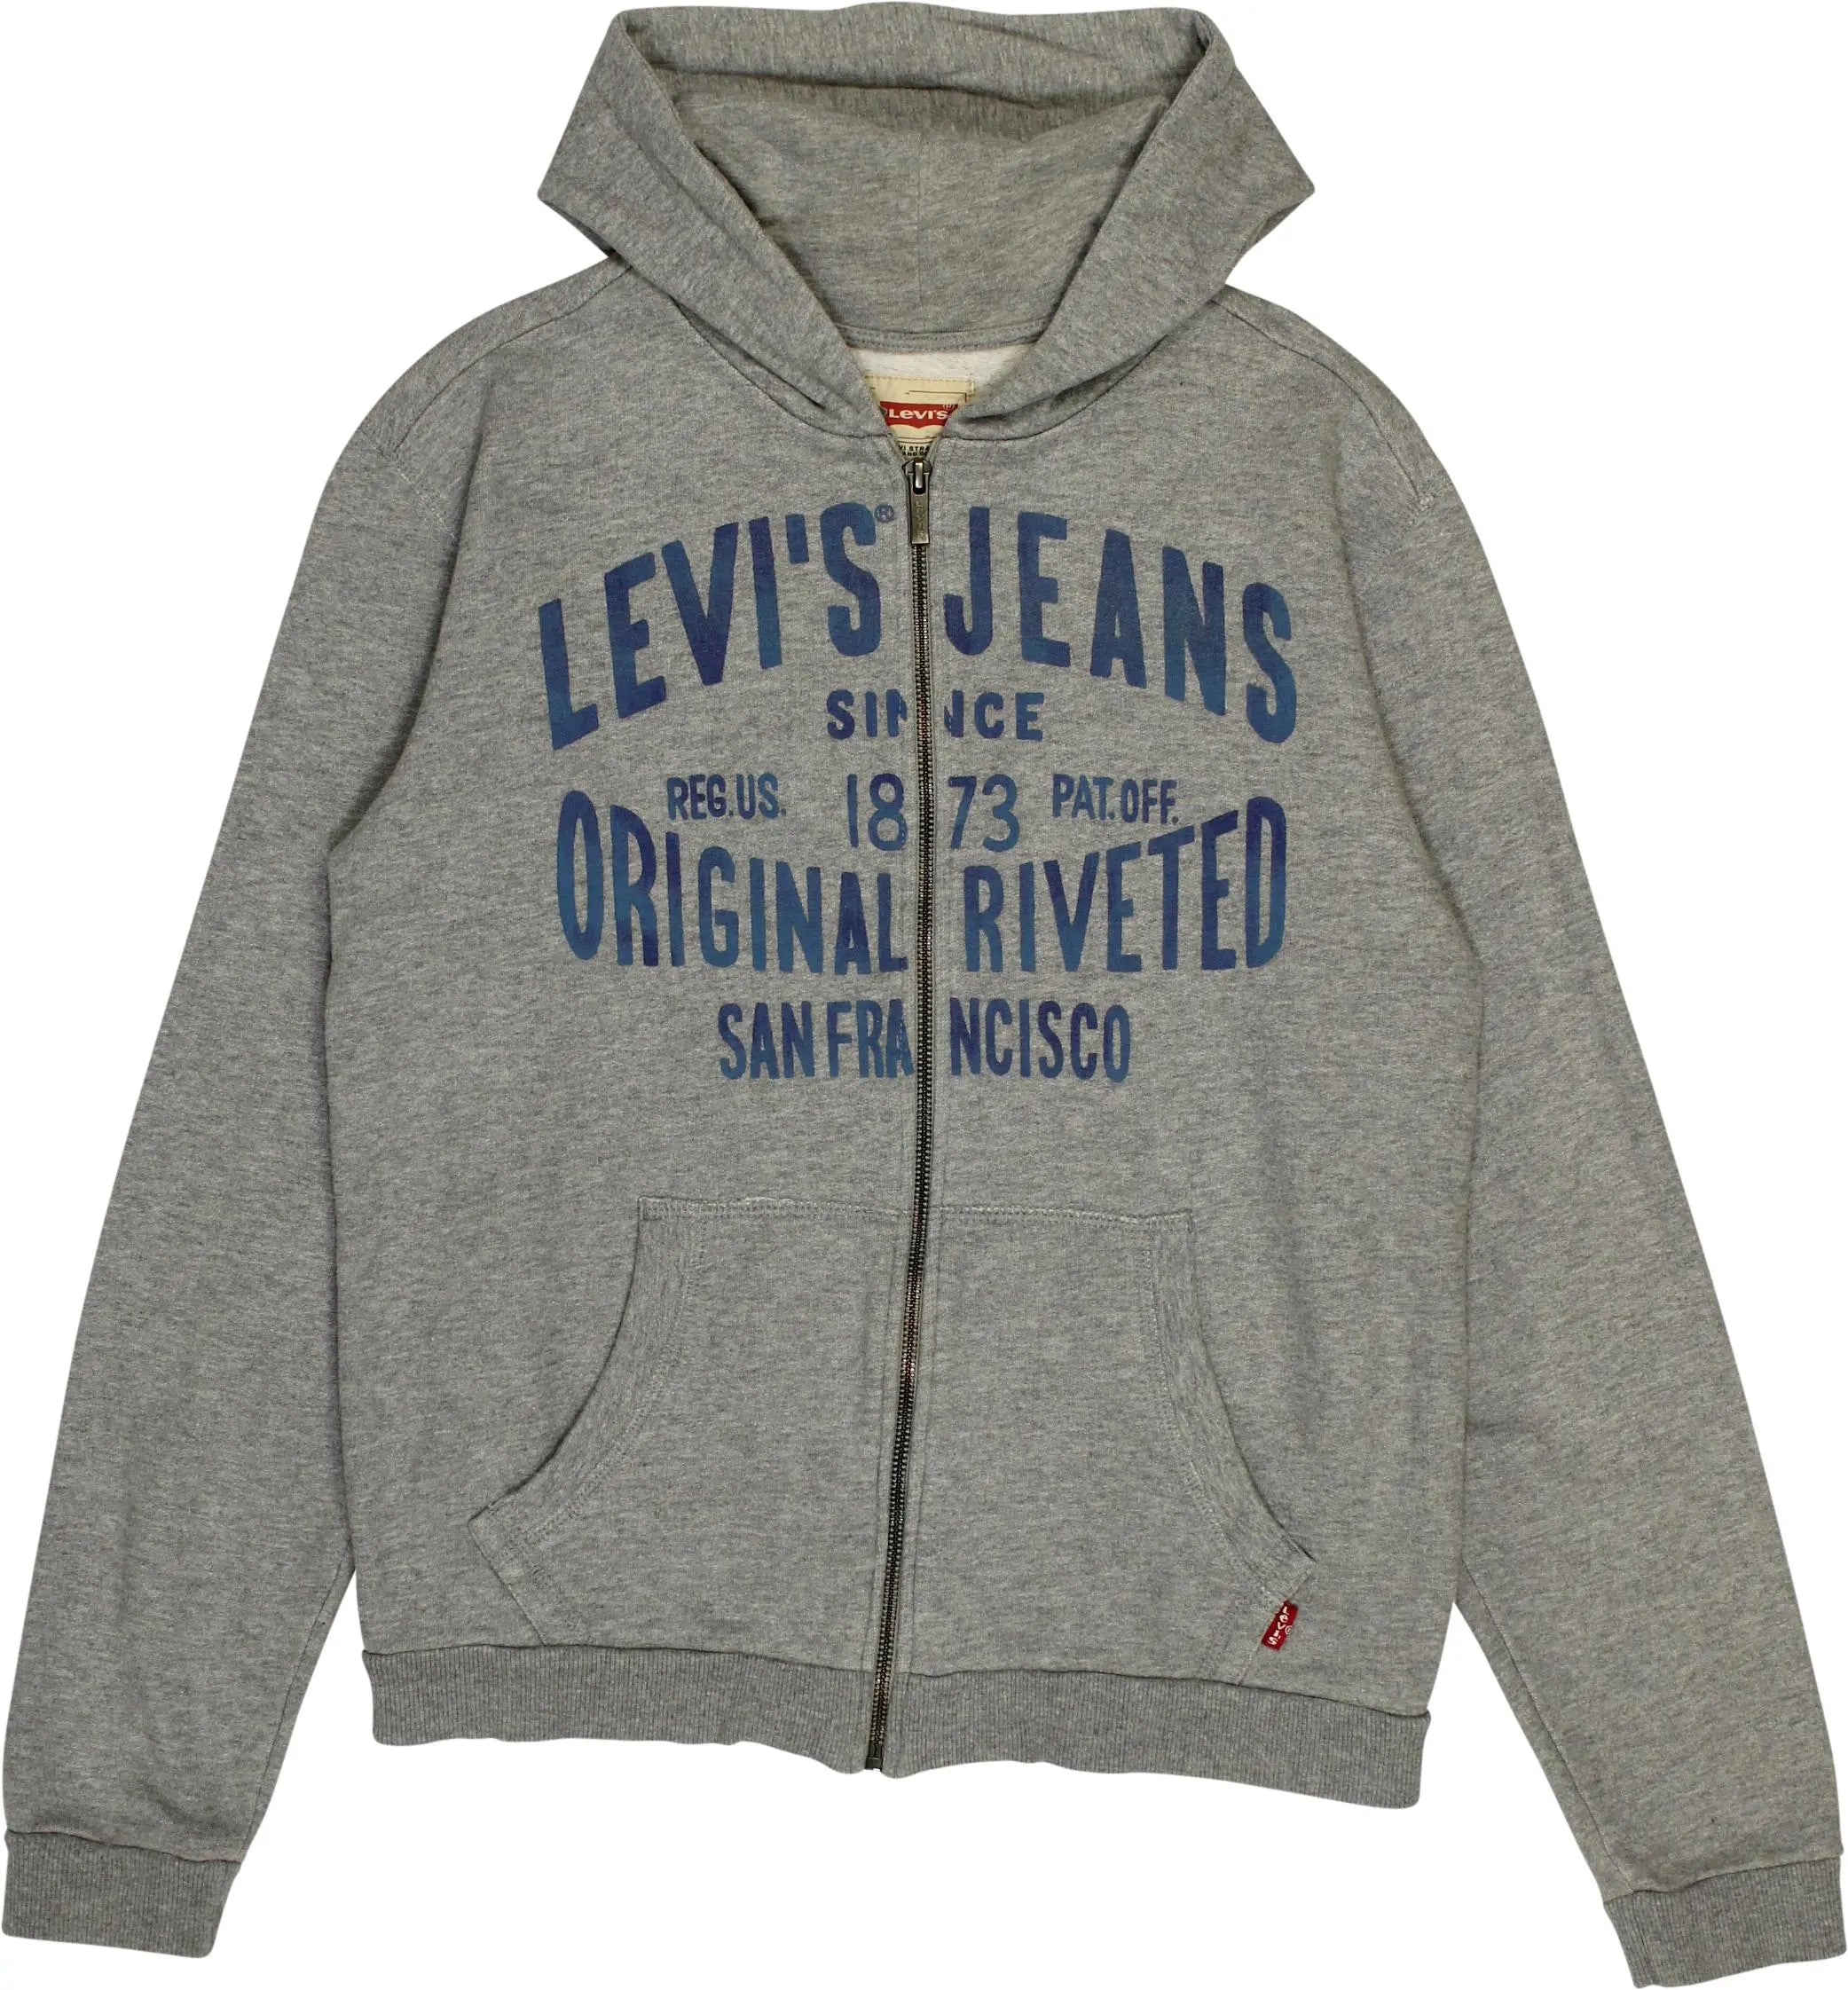 Levi's - Grey Zip-up Hoodie by Levi's- ThriftTale.com - Vintage and second handclothing